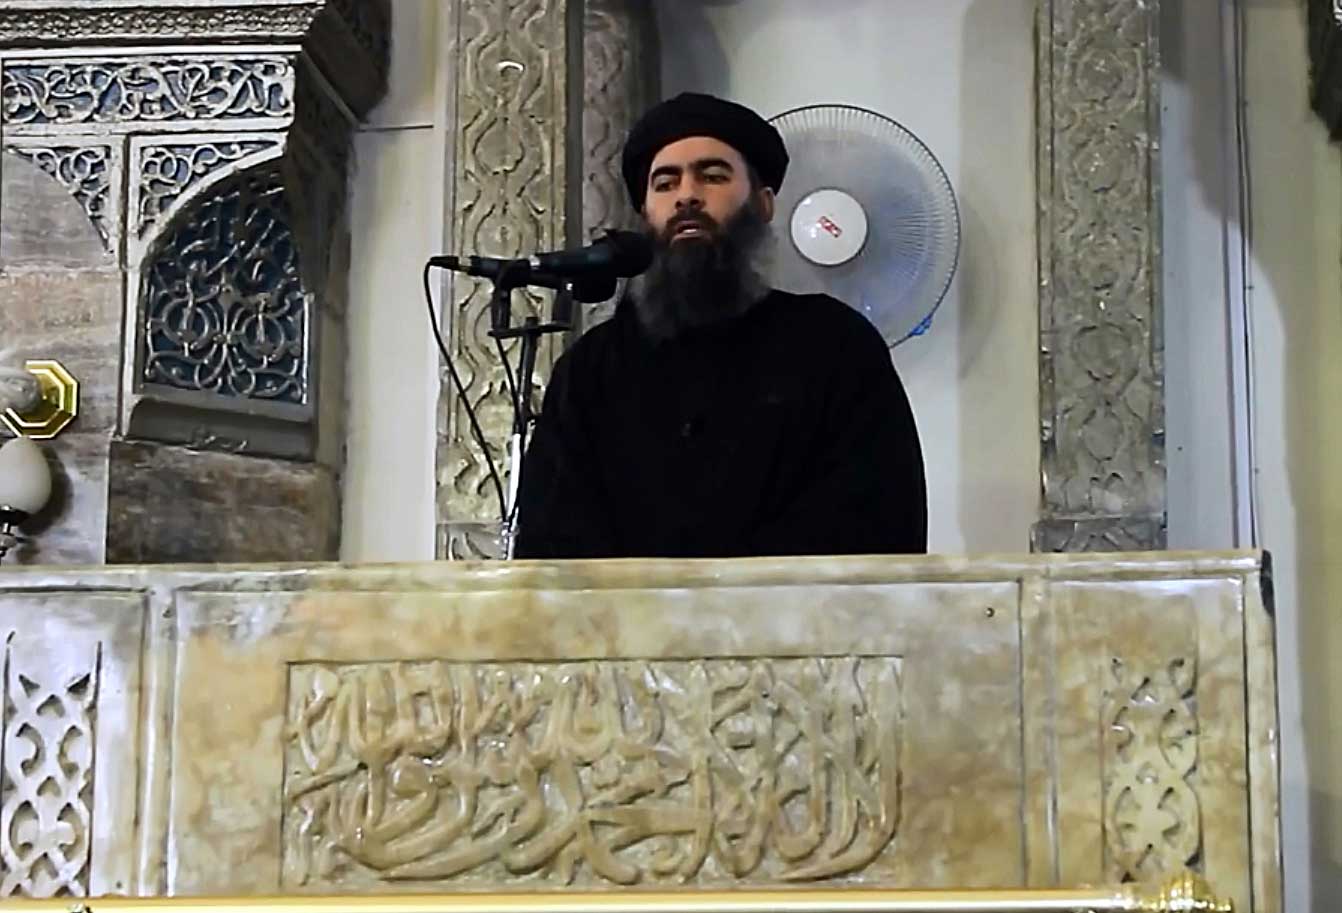 ISIS leader Abu Bakr al-Baghdadi at the mosque in Mosul in 2014.